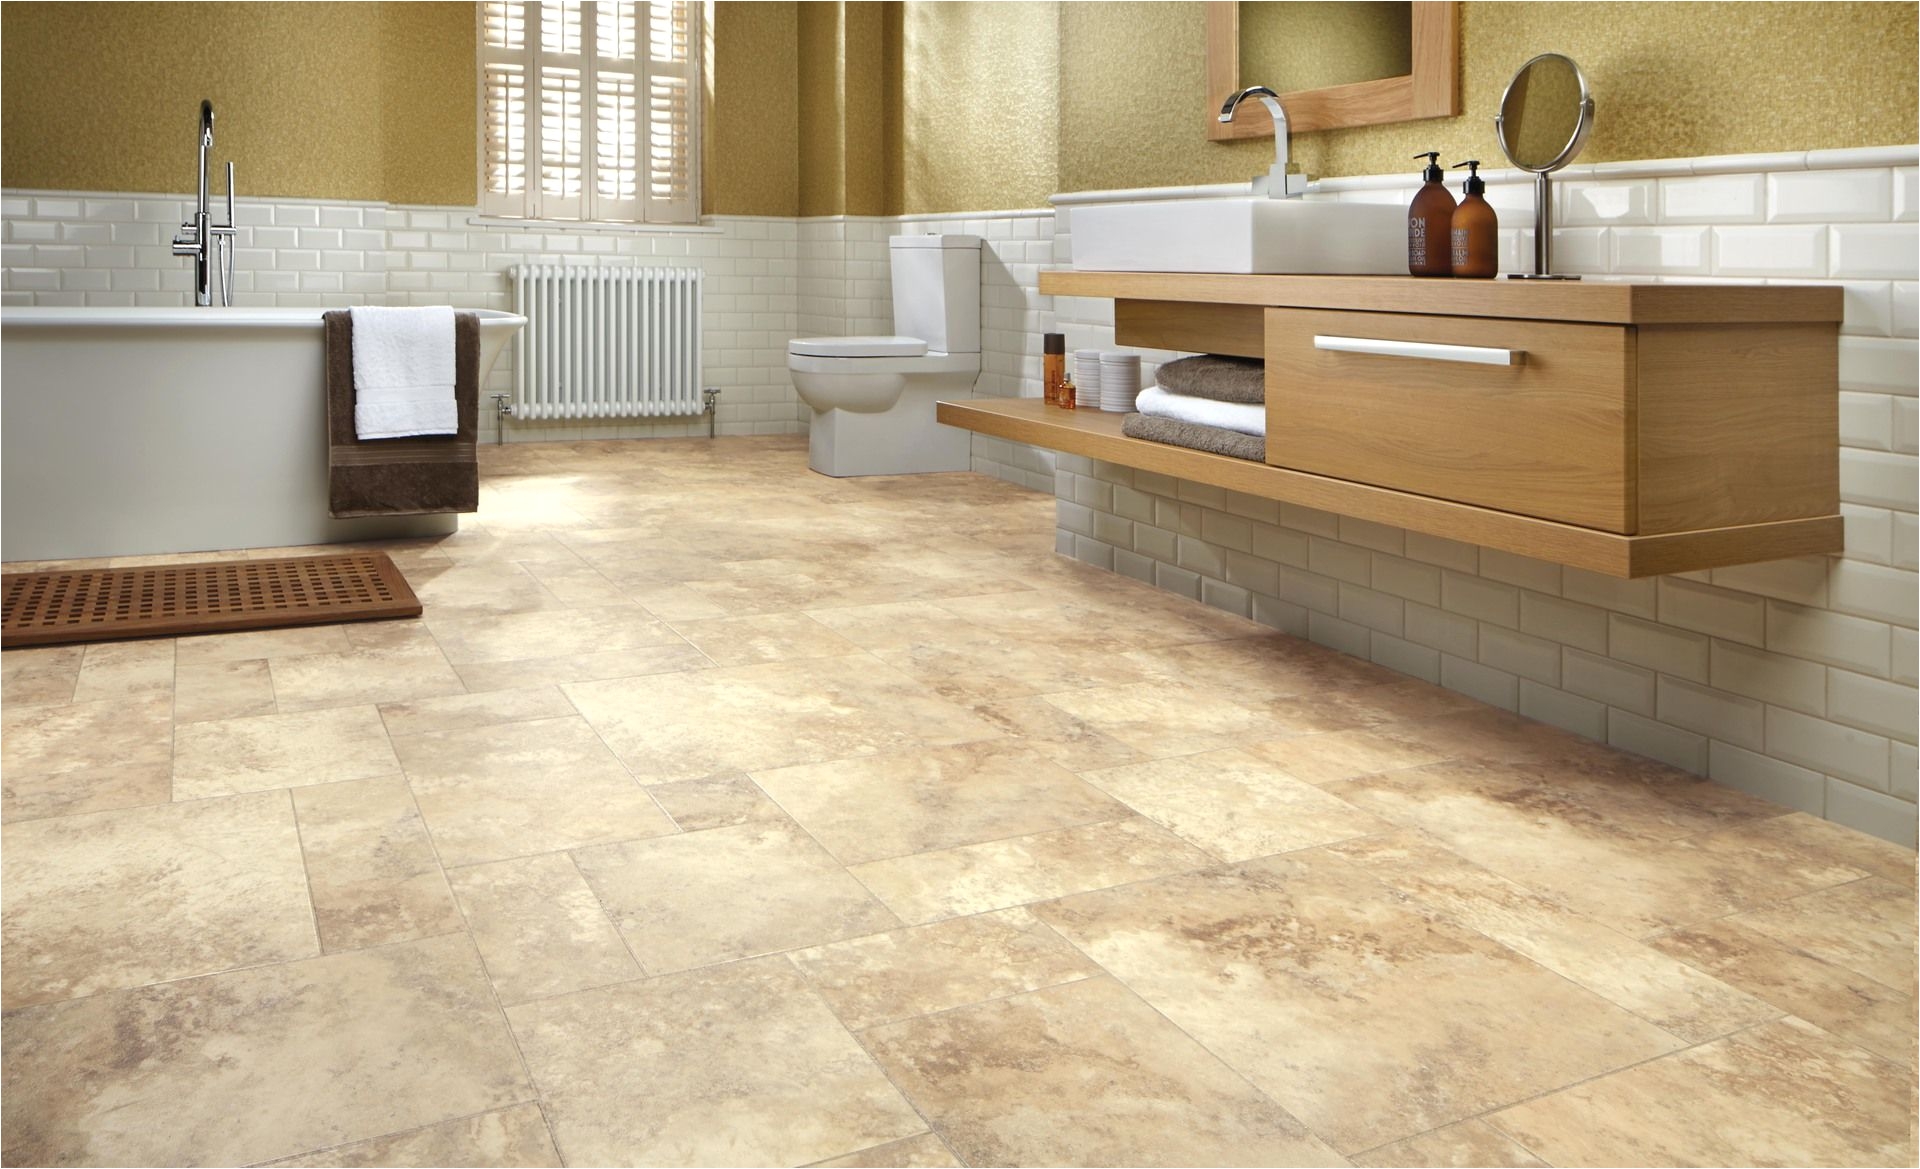 perfect floating tile floor lowes best home design inspiration of loose lay vinyl plank flooring lowes